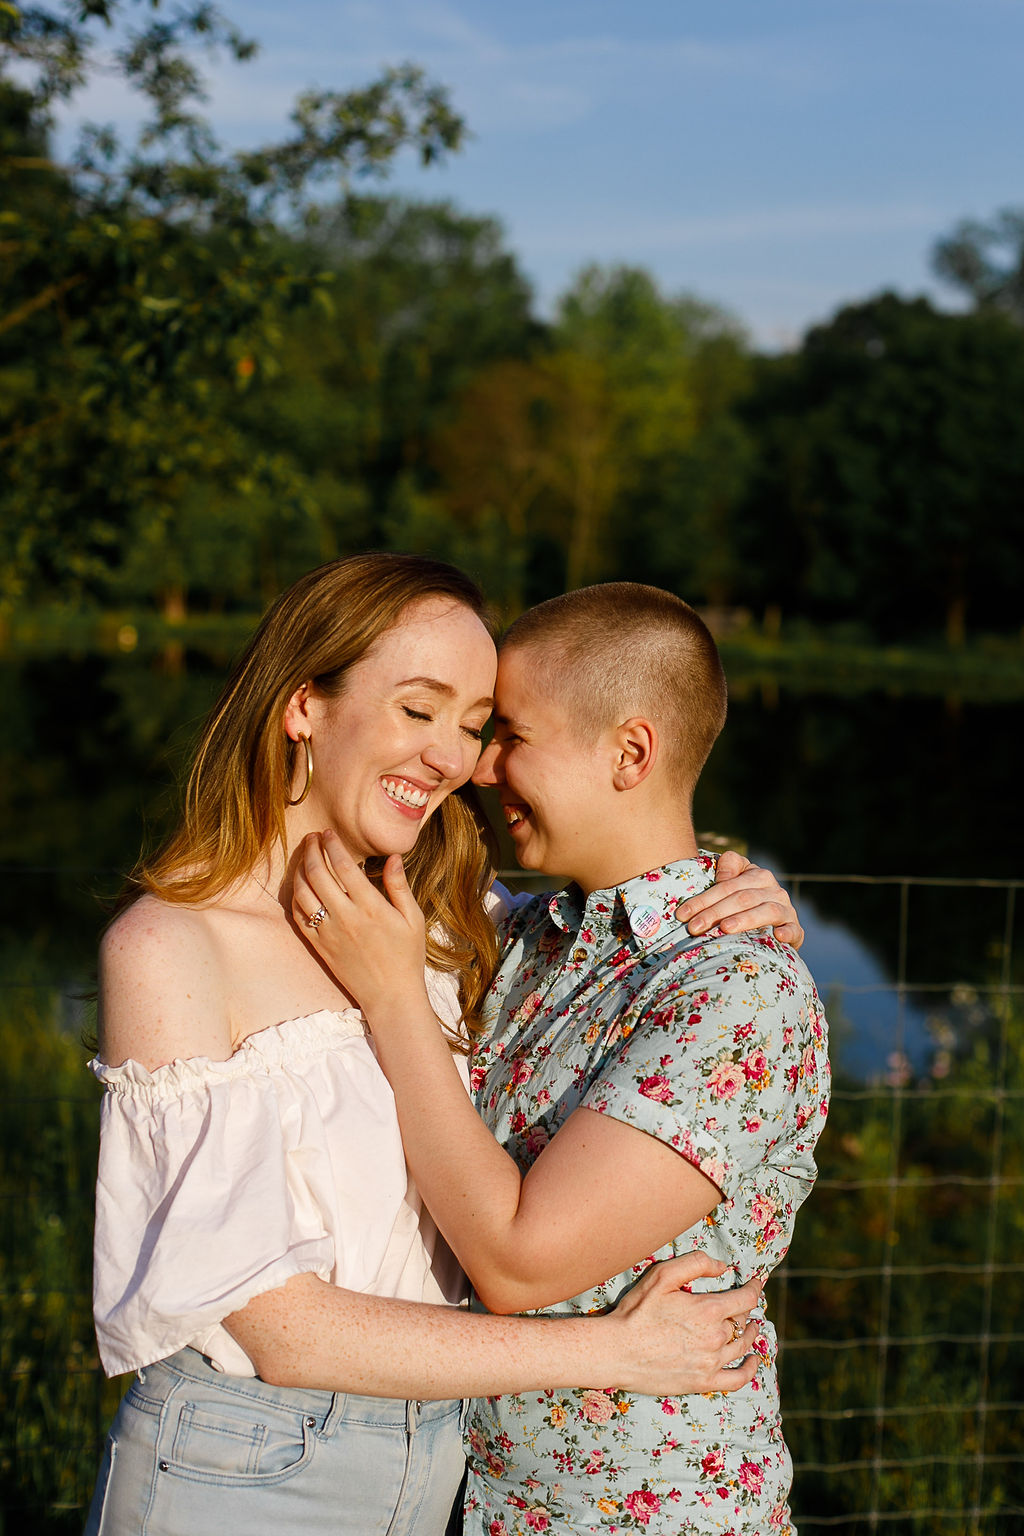 Summer queer outfit ideas for an engagement session